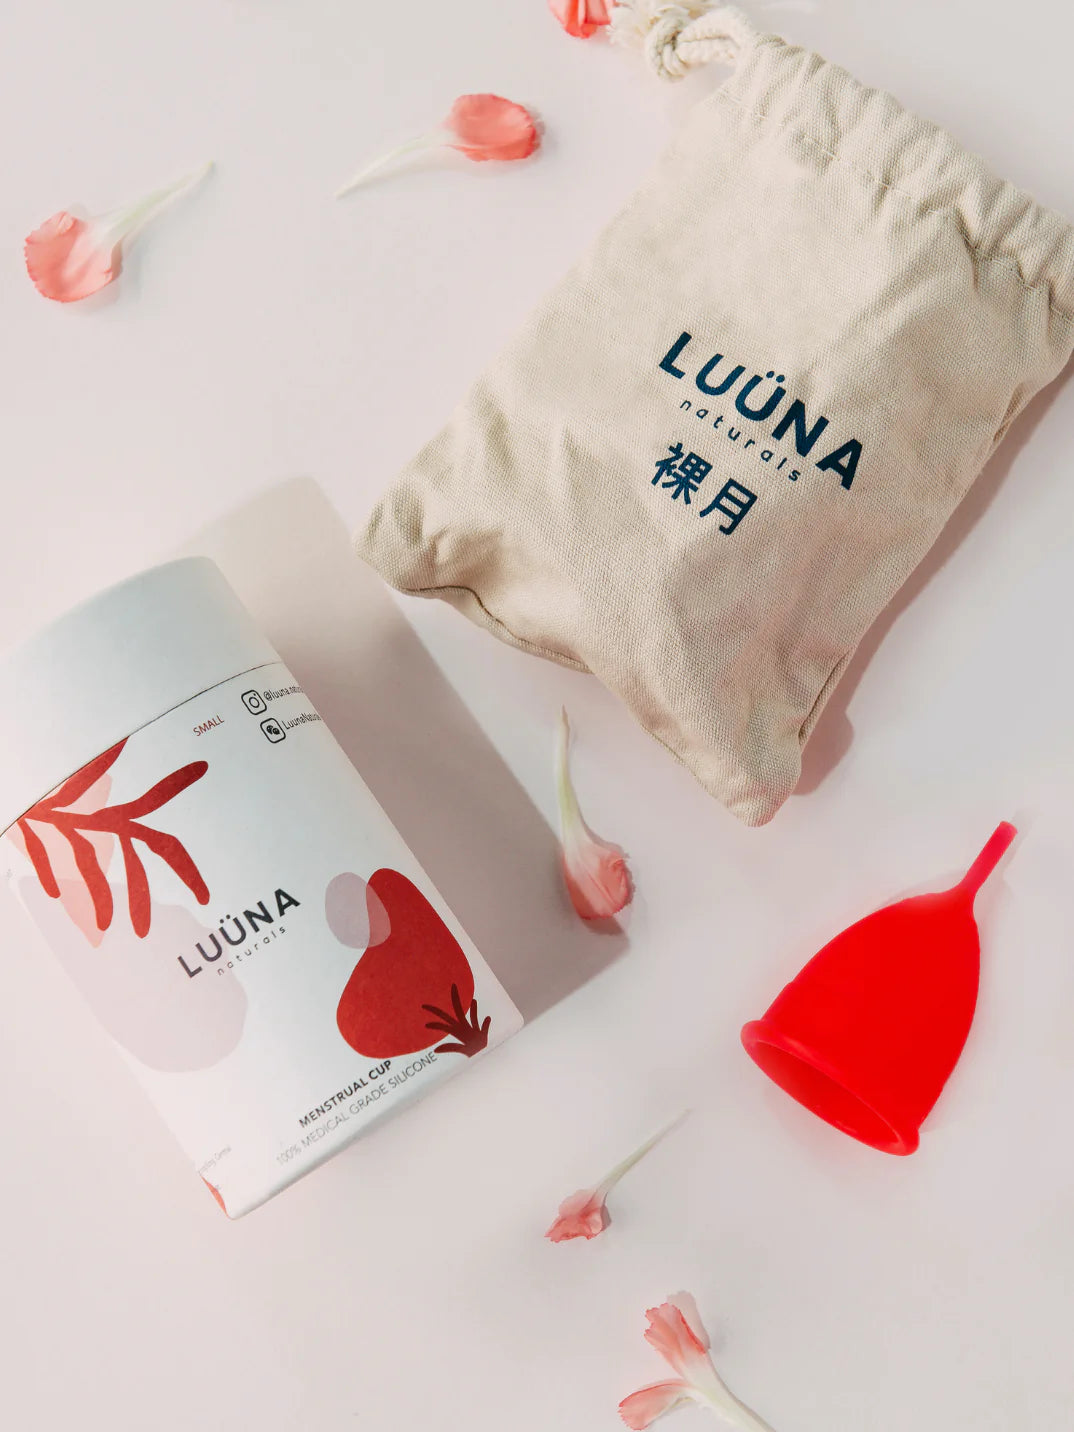 LUUNA Naturals period care period cup, tampons and pads that give back to young girls in need